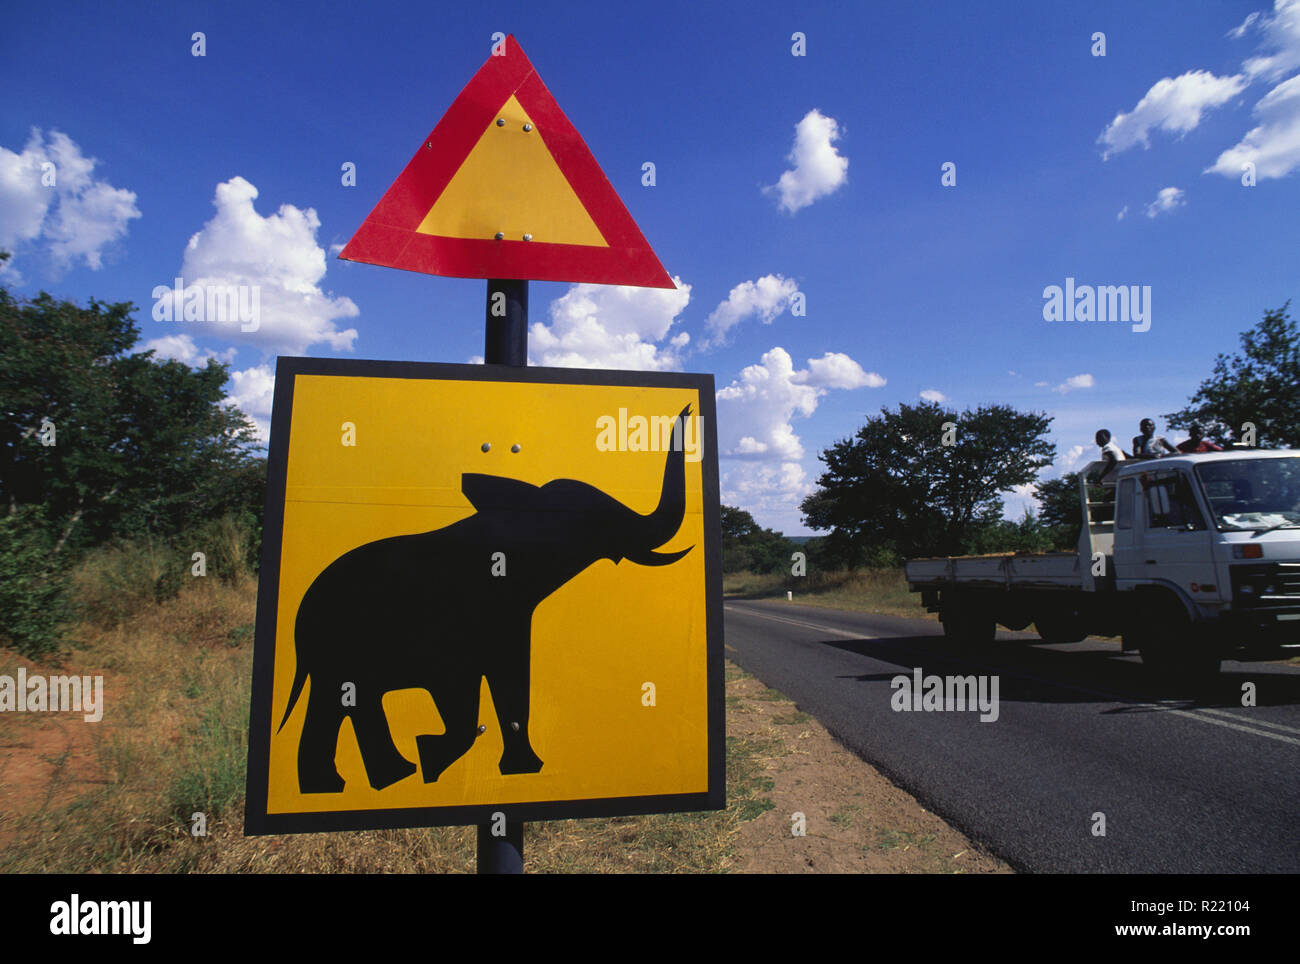 Road sign in Zimbabwe warns drivers of the presence of elephants in the area. African elephants are elephants of the genus Loxodonta. Stock Photo